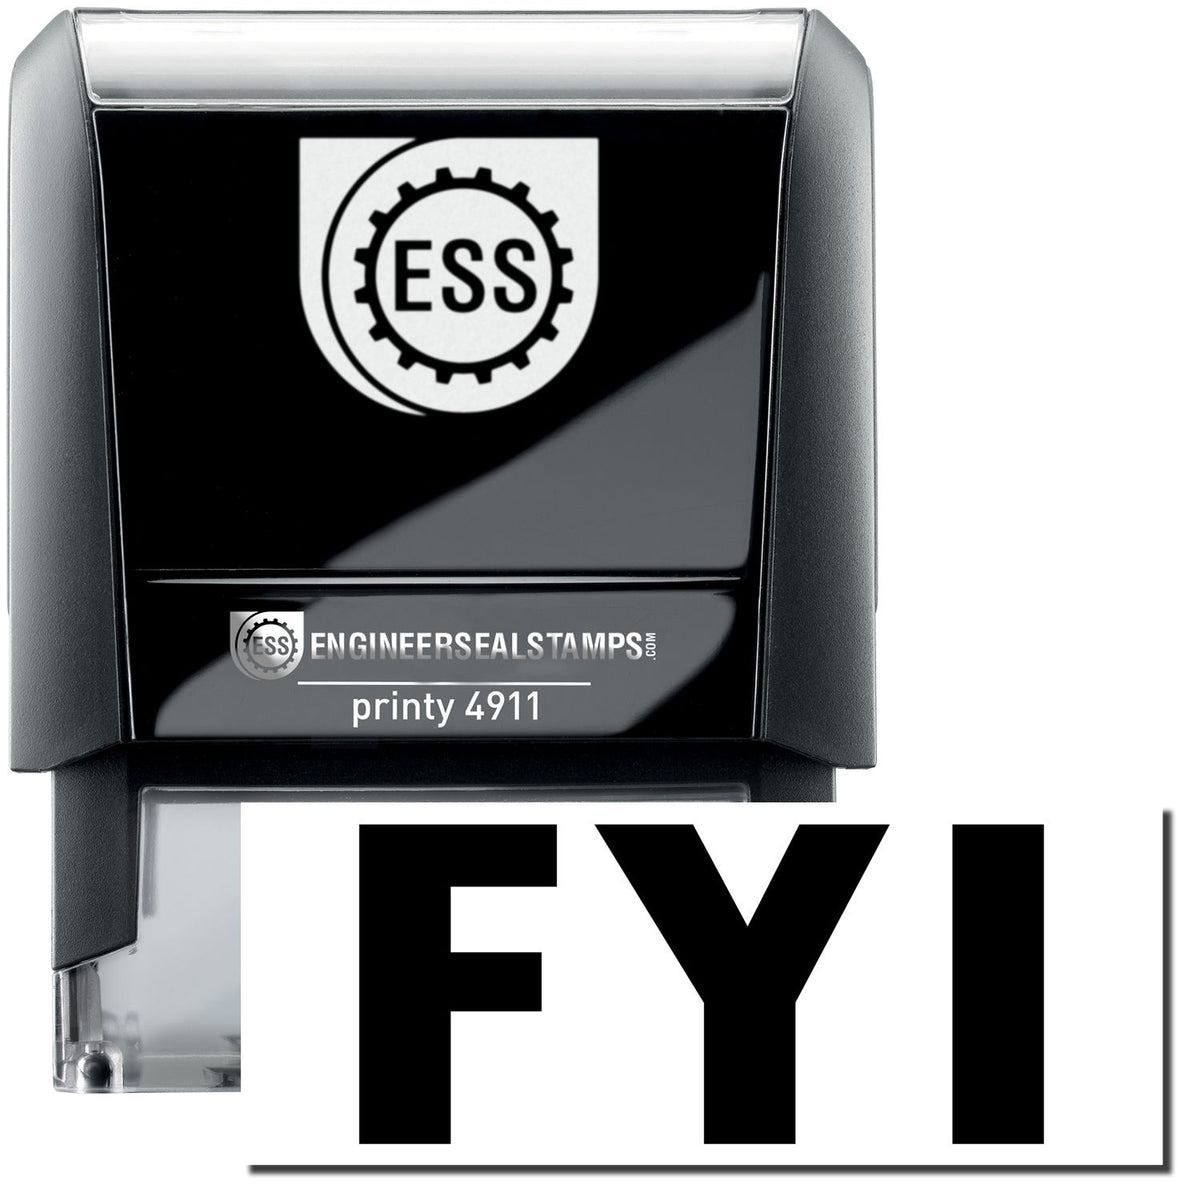 A self-inking stamp with a stamped image showing how the text &quot;FYI&quot; is displayed after stamping.